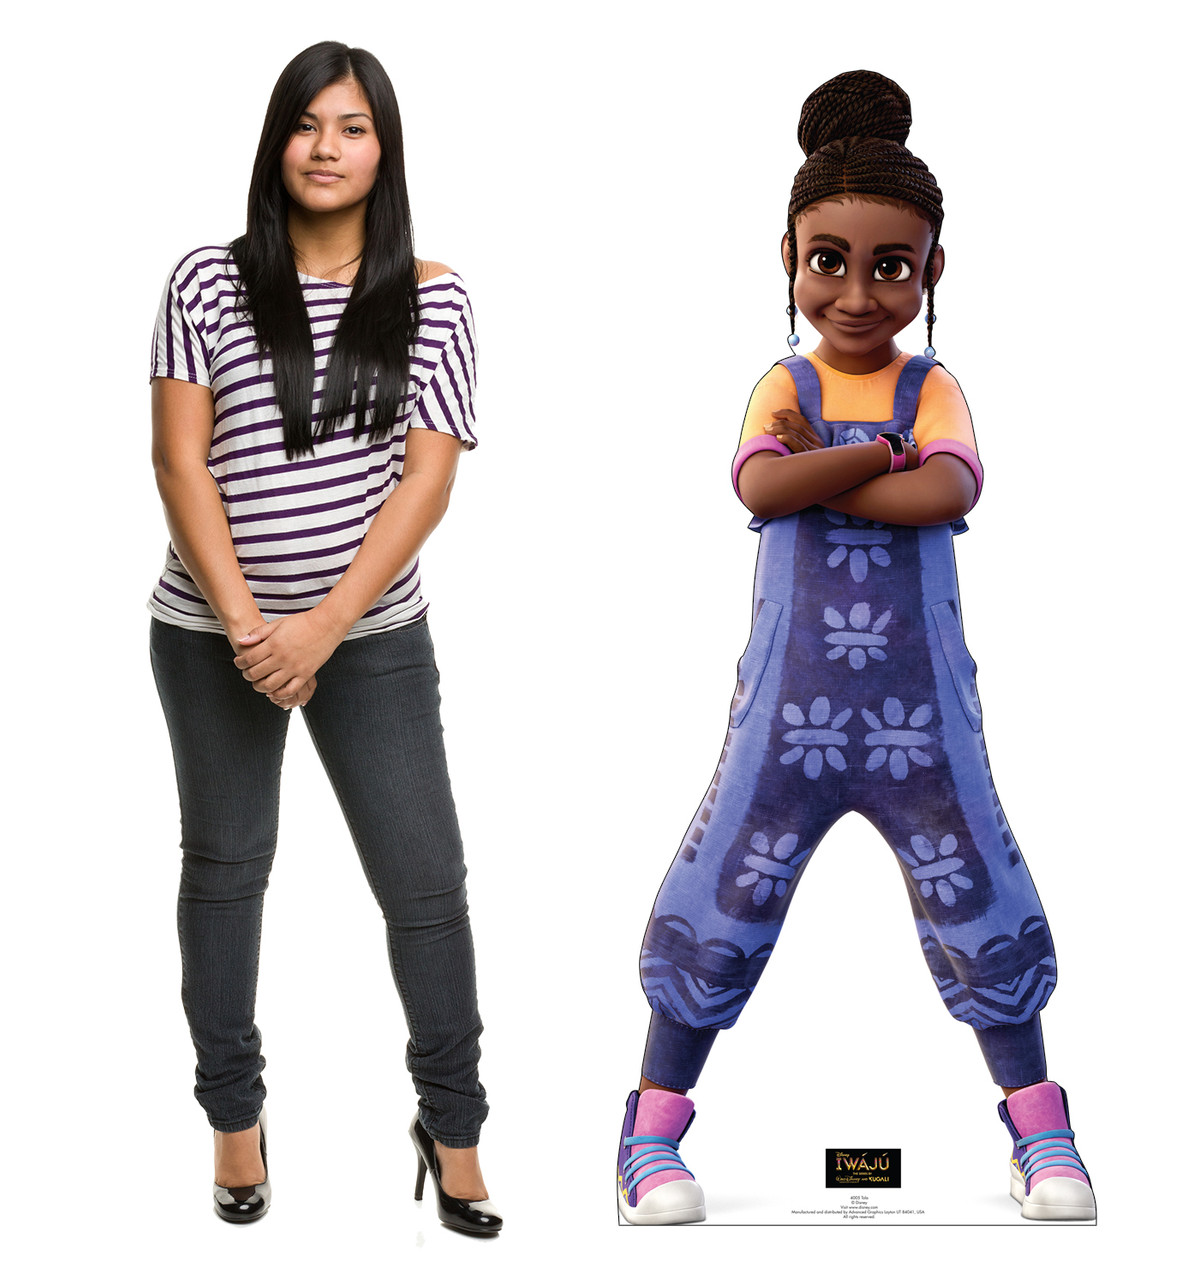 Life-size cardboard standee of Tola from Disney's Iwaju with model.